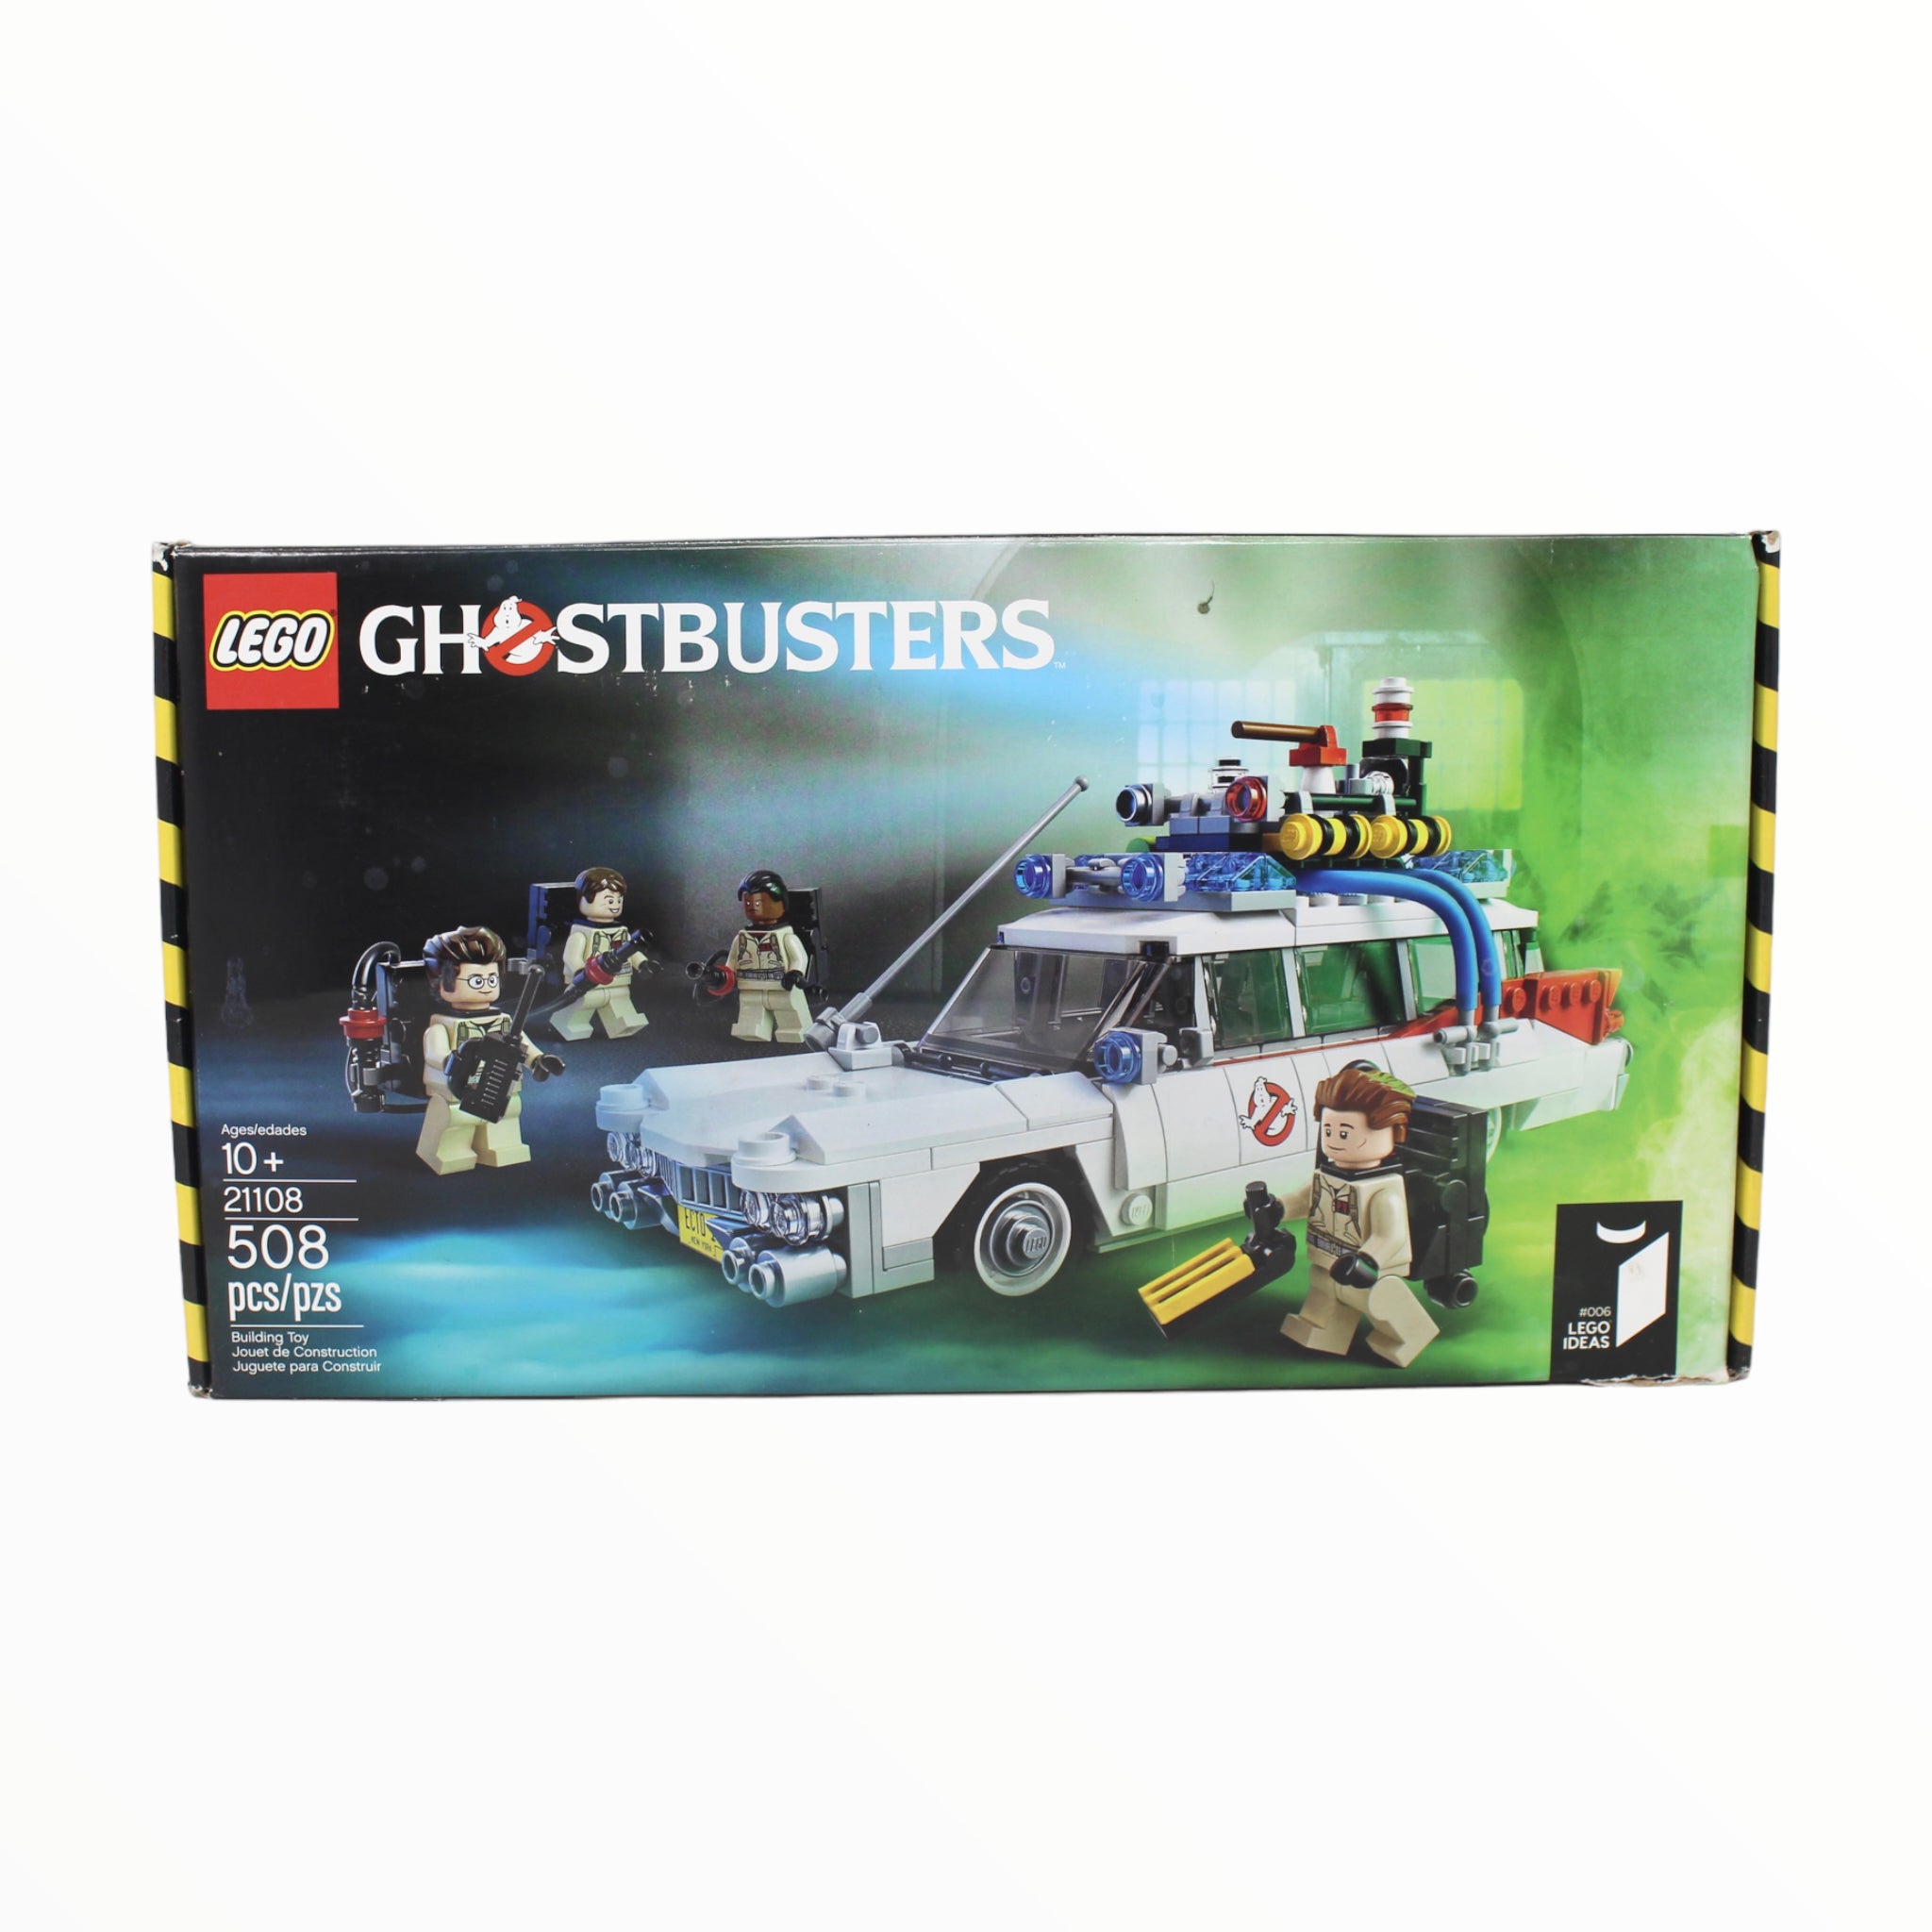 Certified Used Set 21108 LEGO Ideas Ghostbusters Ecto-1